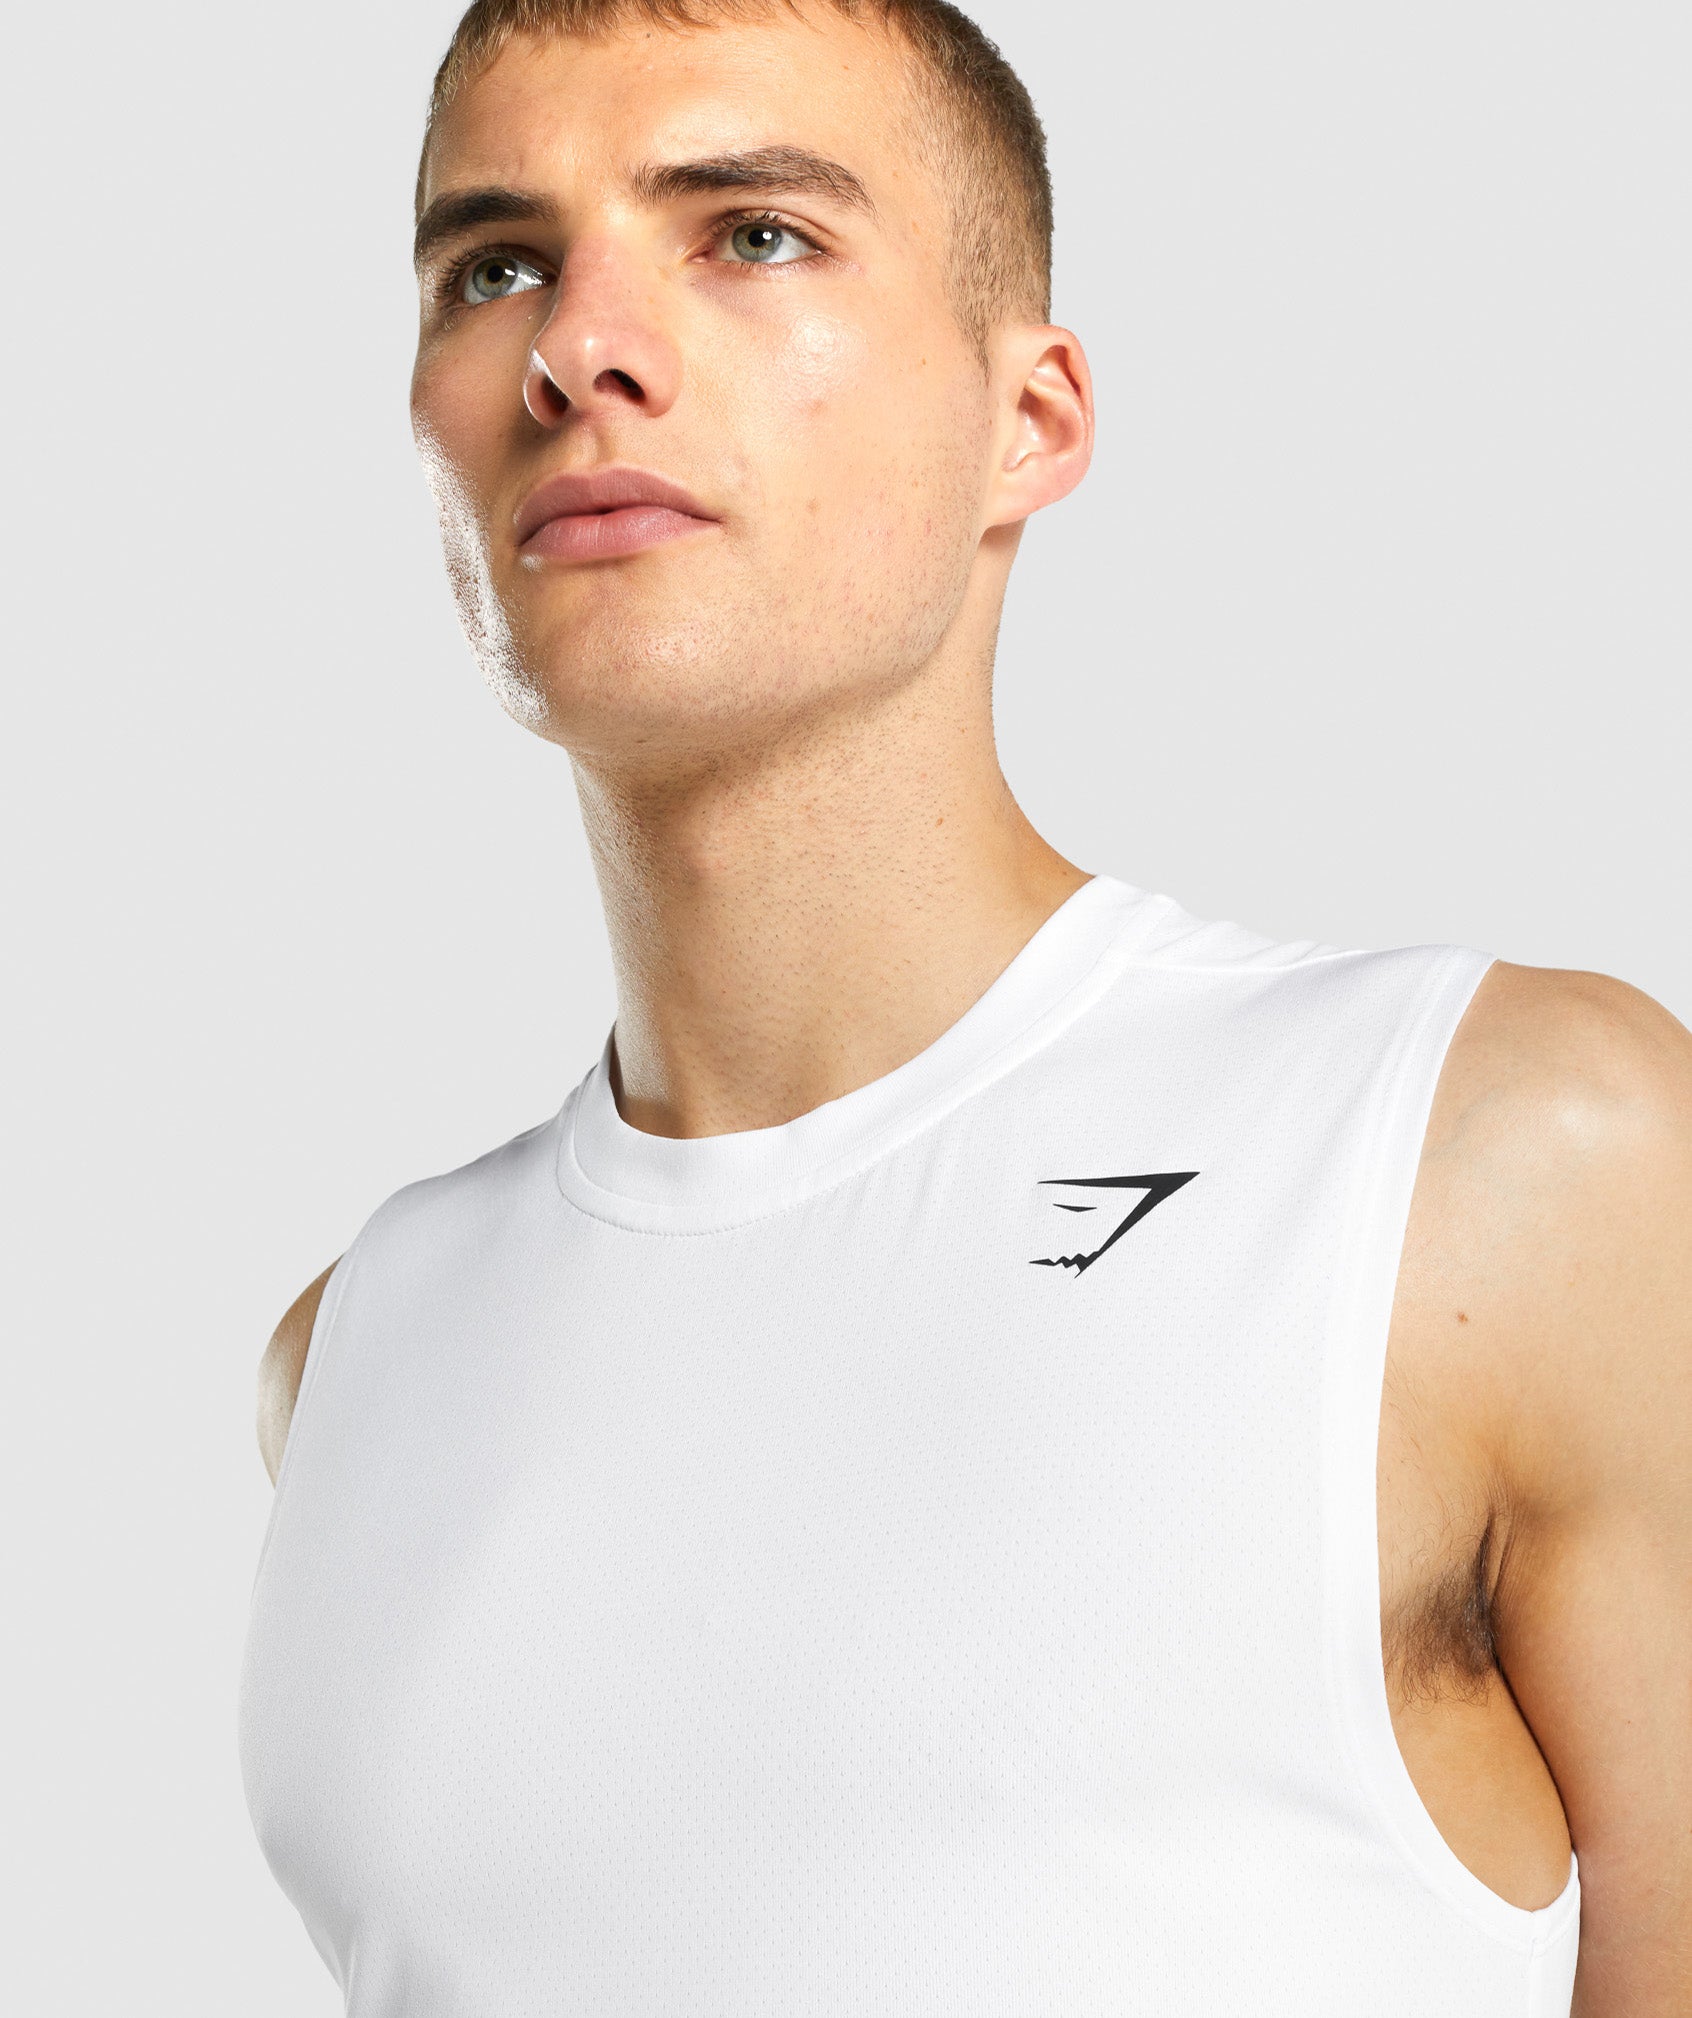 Arrival Sleeveless T-Shirt in White - view 6